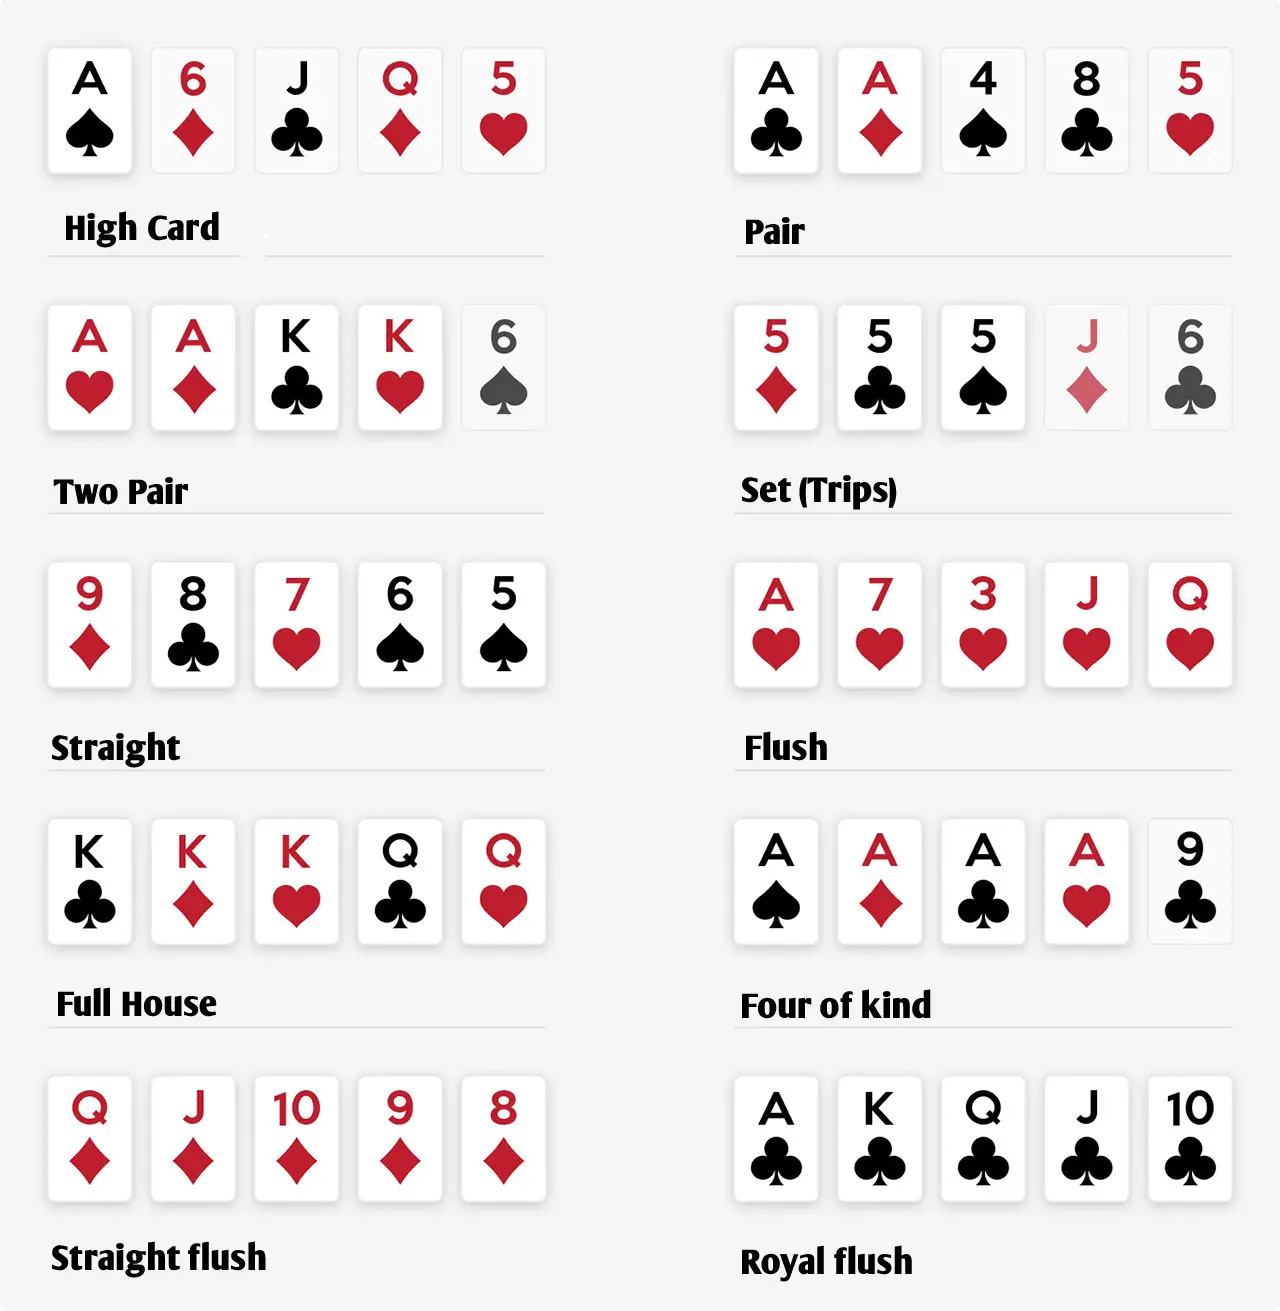 How to Play Short Deck Hold'em  Short Deck Poker Rules & Strategy